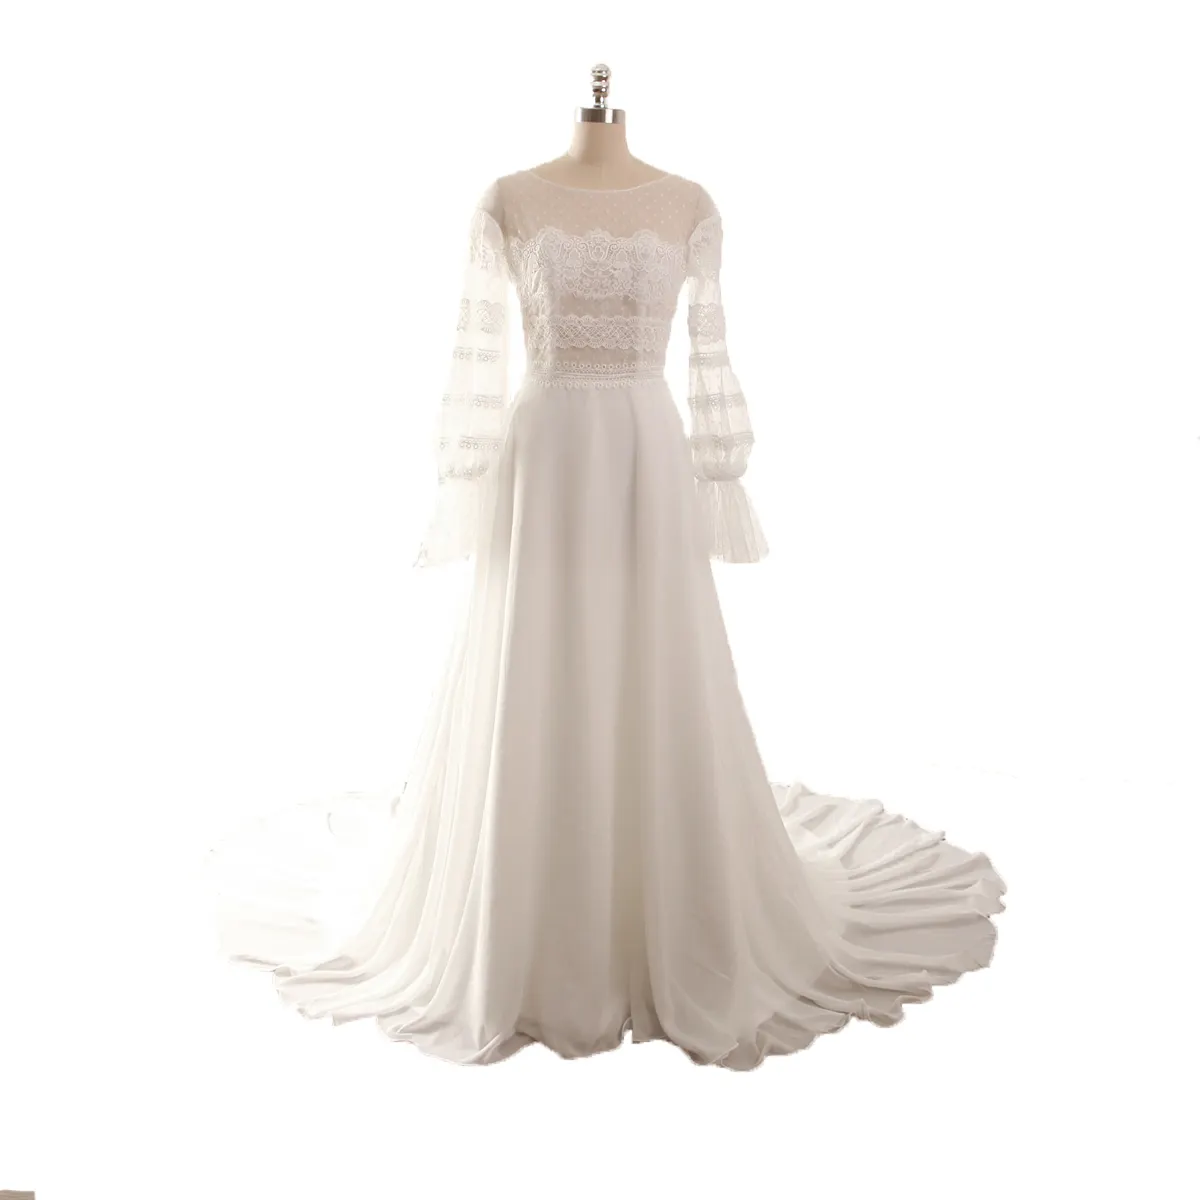 Summer Ivory A line Illusion Neck Long Sleeve Backless Vintage Lace Chiffon wedding dress for women